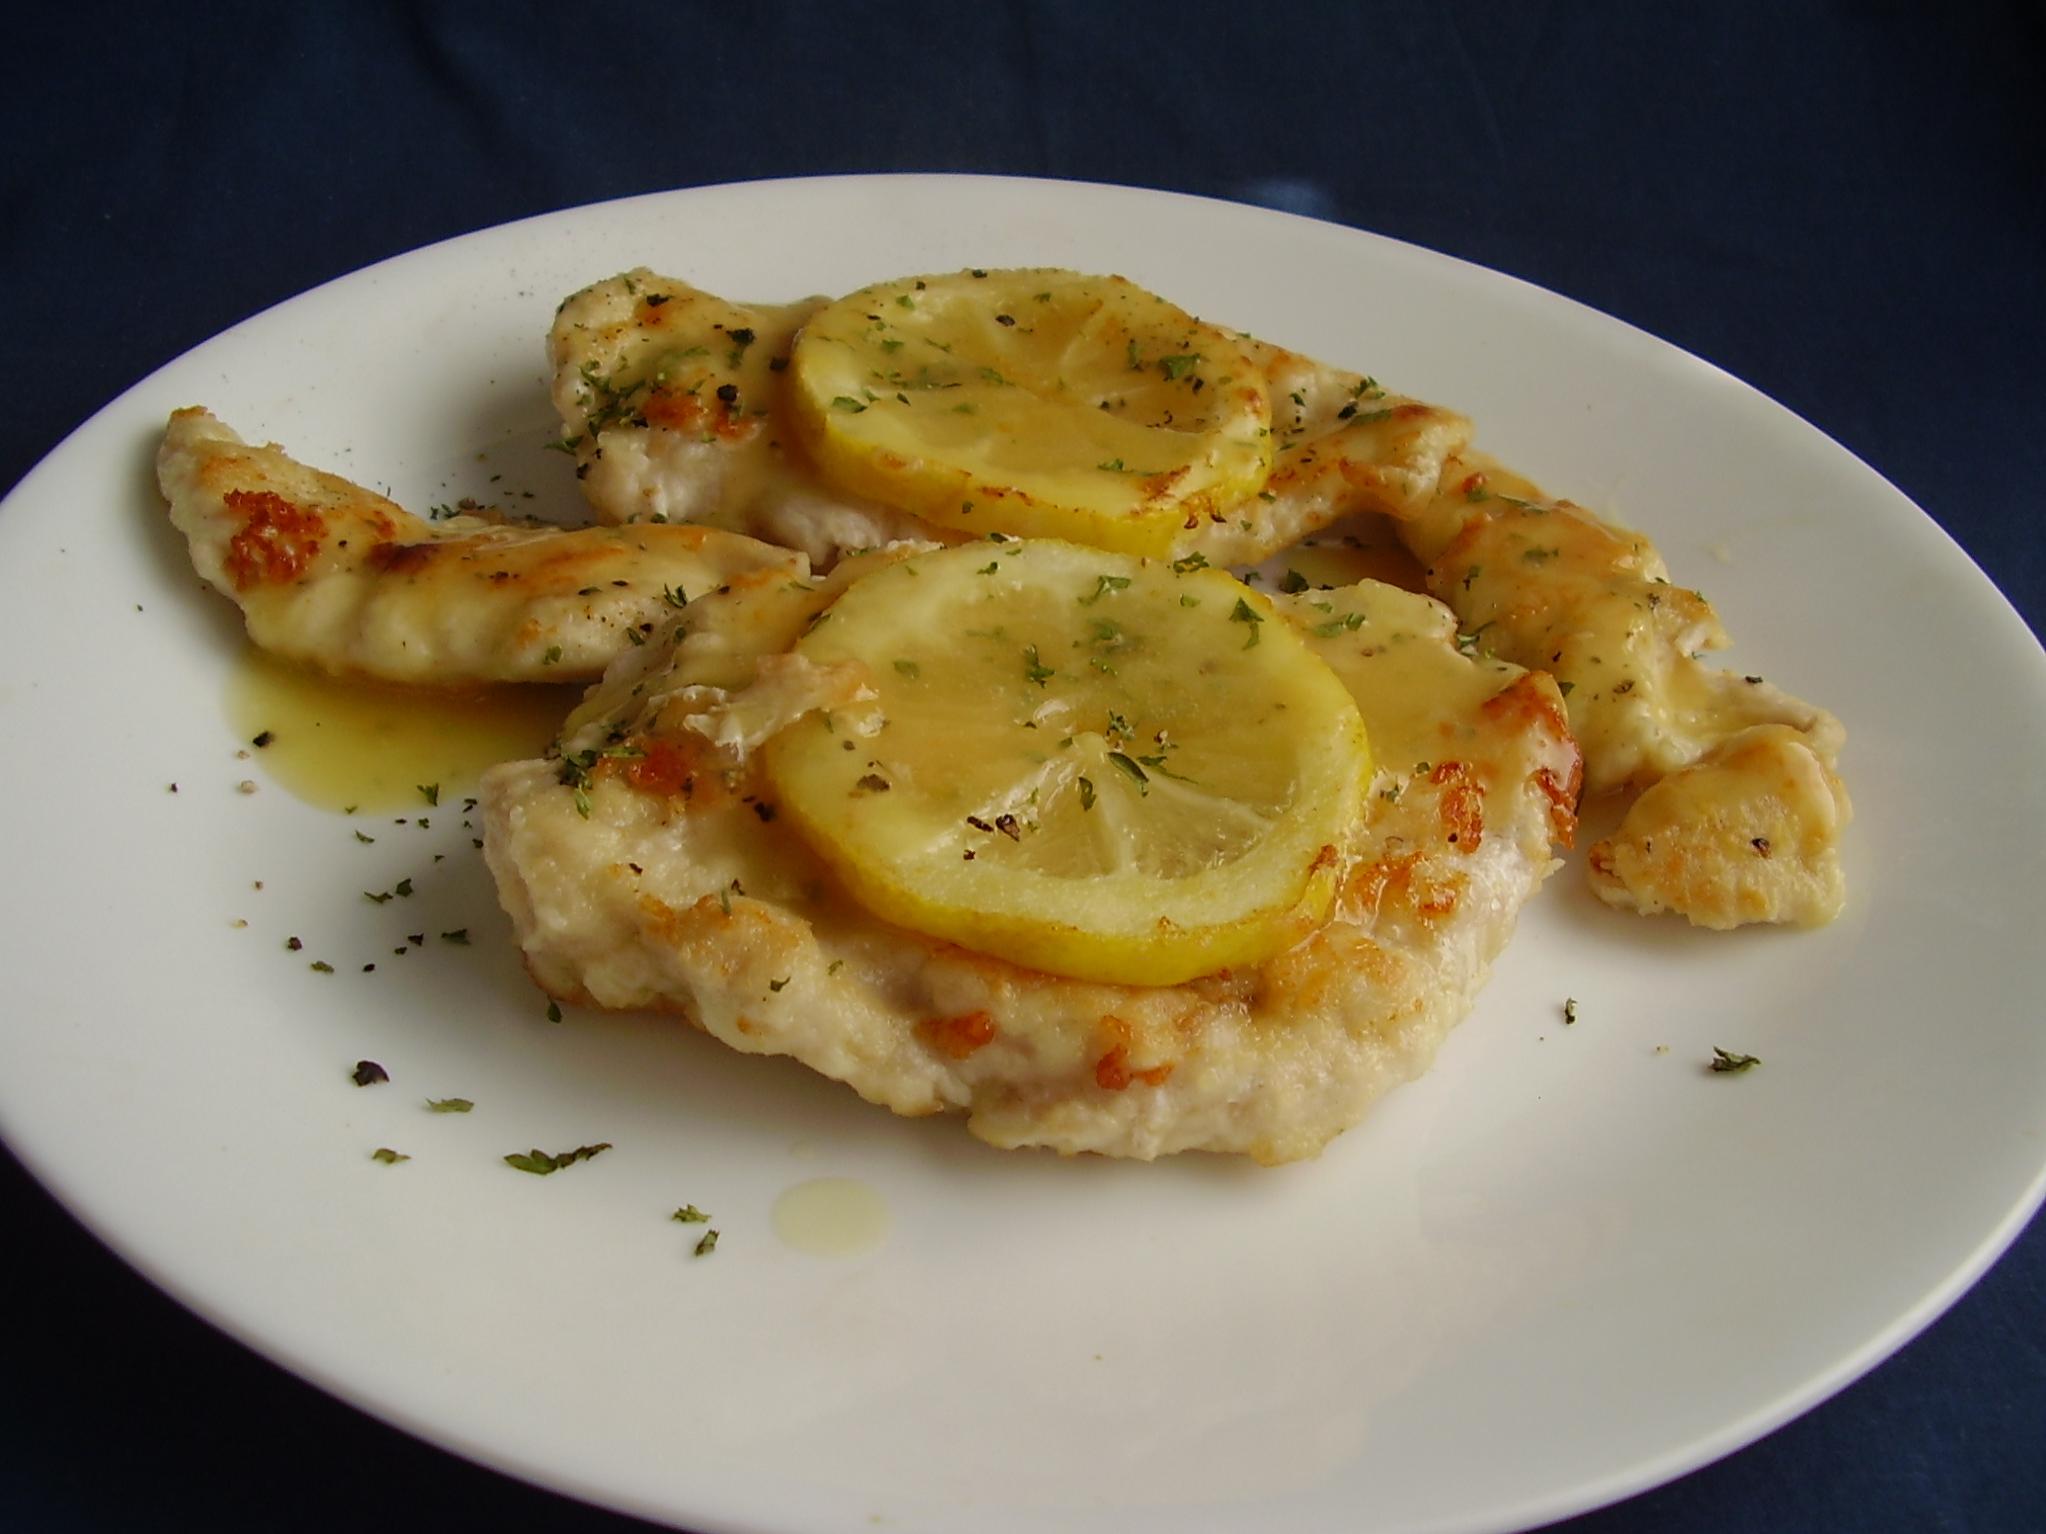  Savoring the tangy citrus flavors of lemon chicken